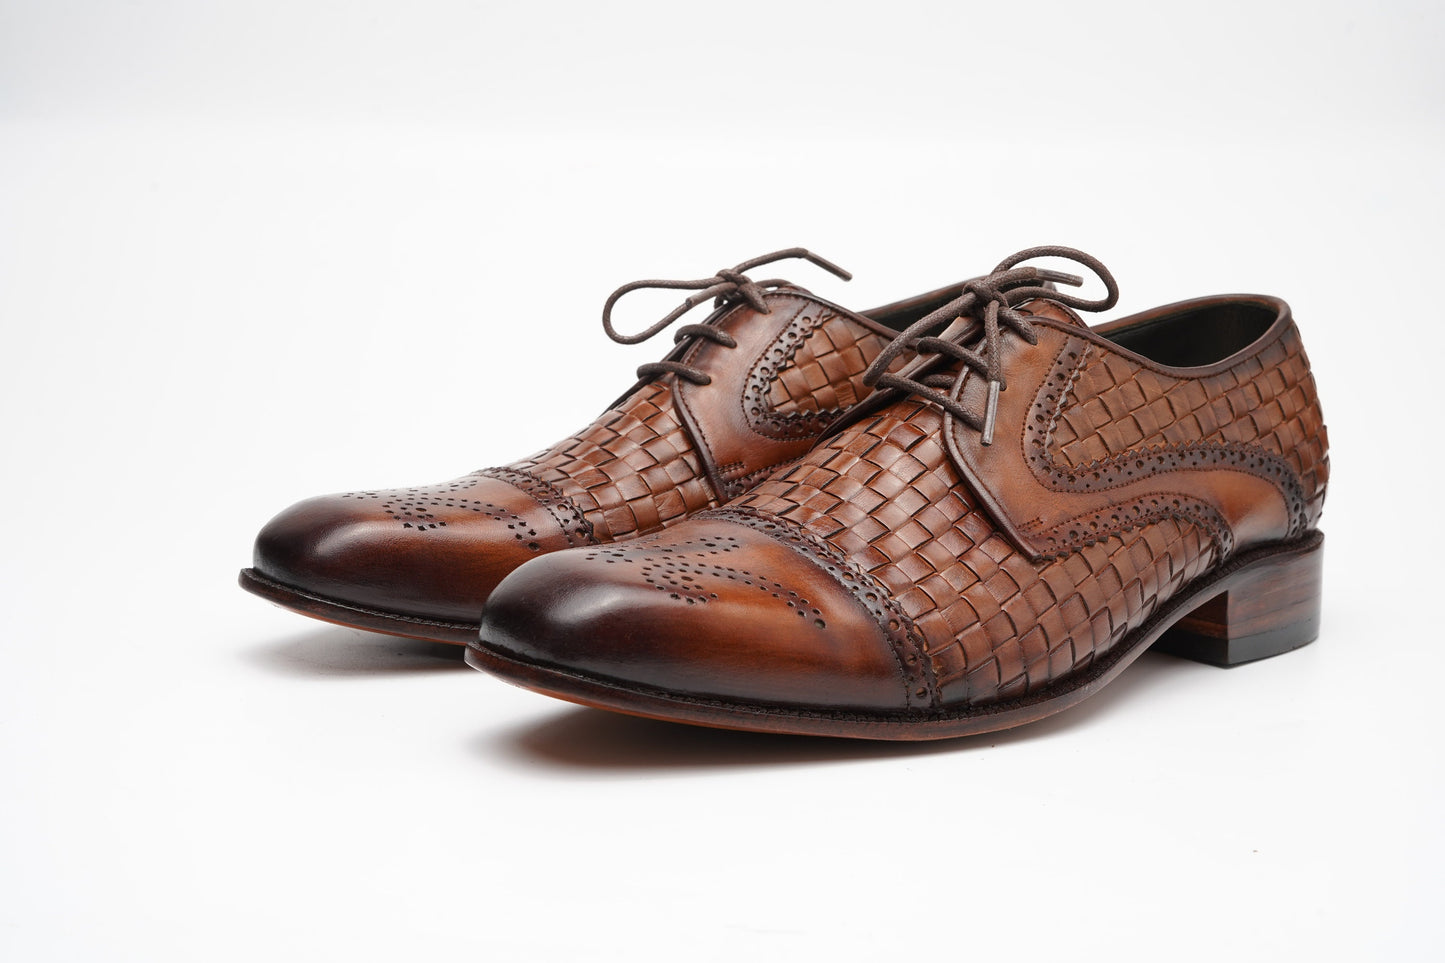 Real Handmade Cap Toe Derby Brogue Leather Shoes for men made of Hand Woven crust Leather Woozy Store